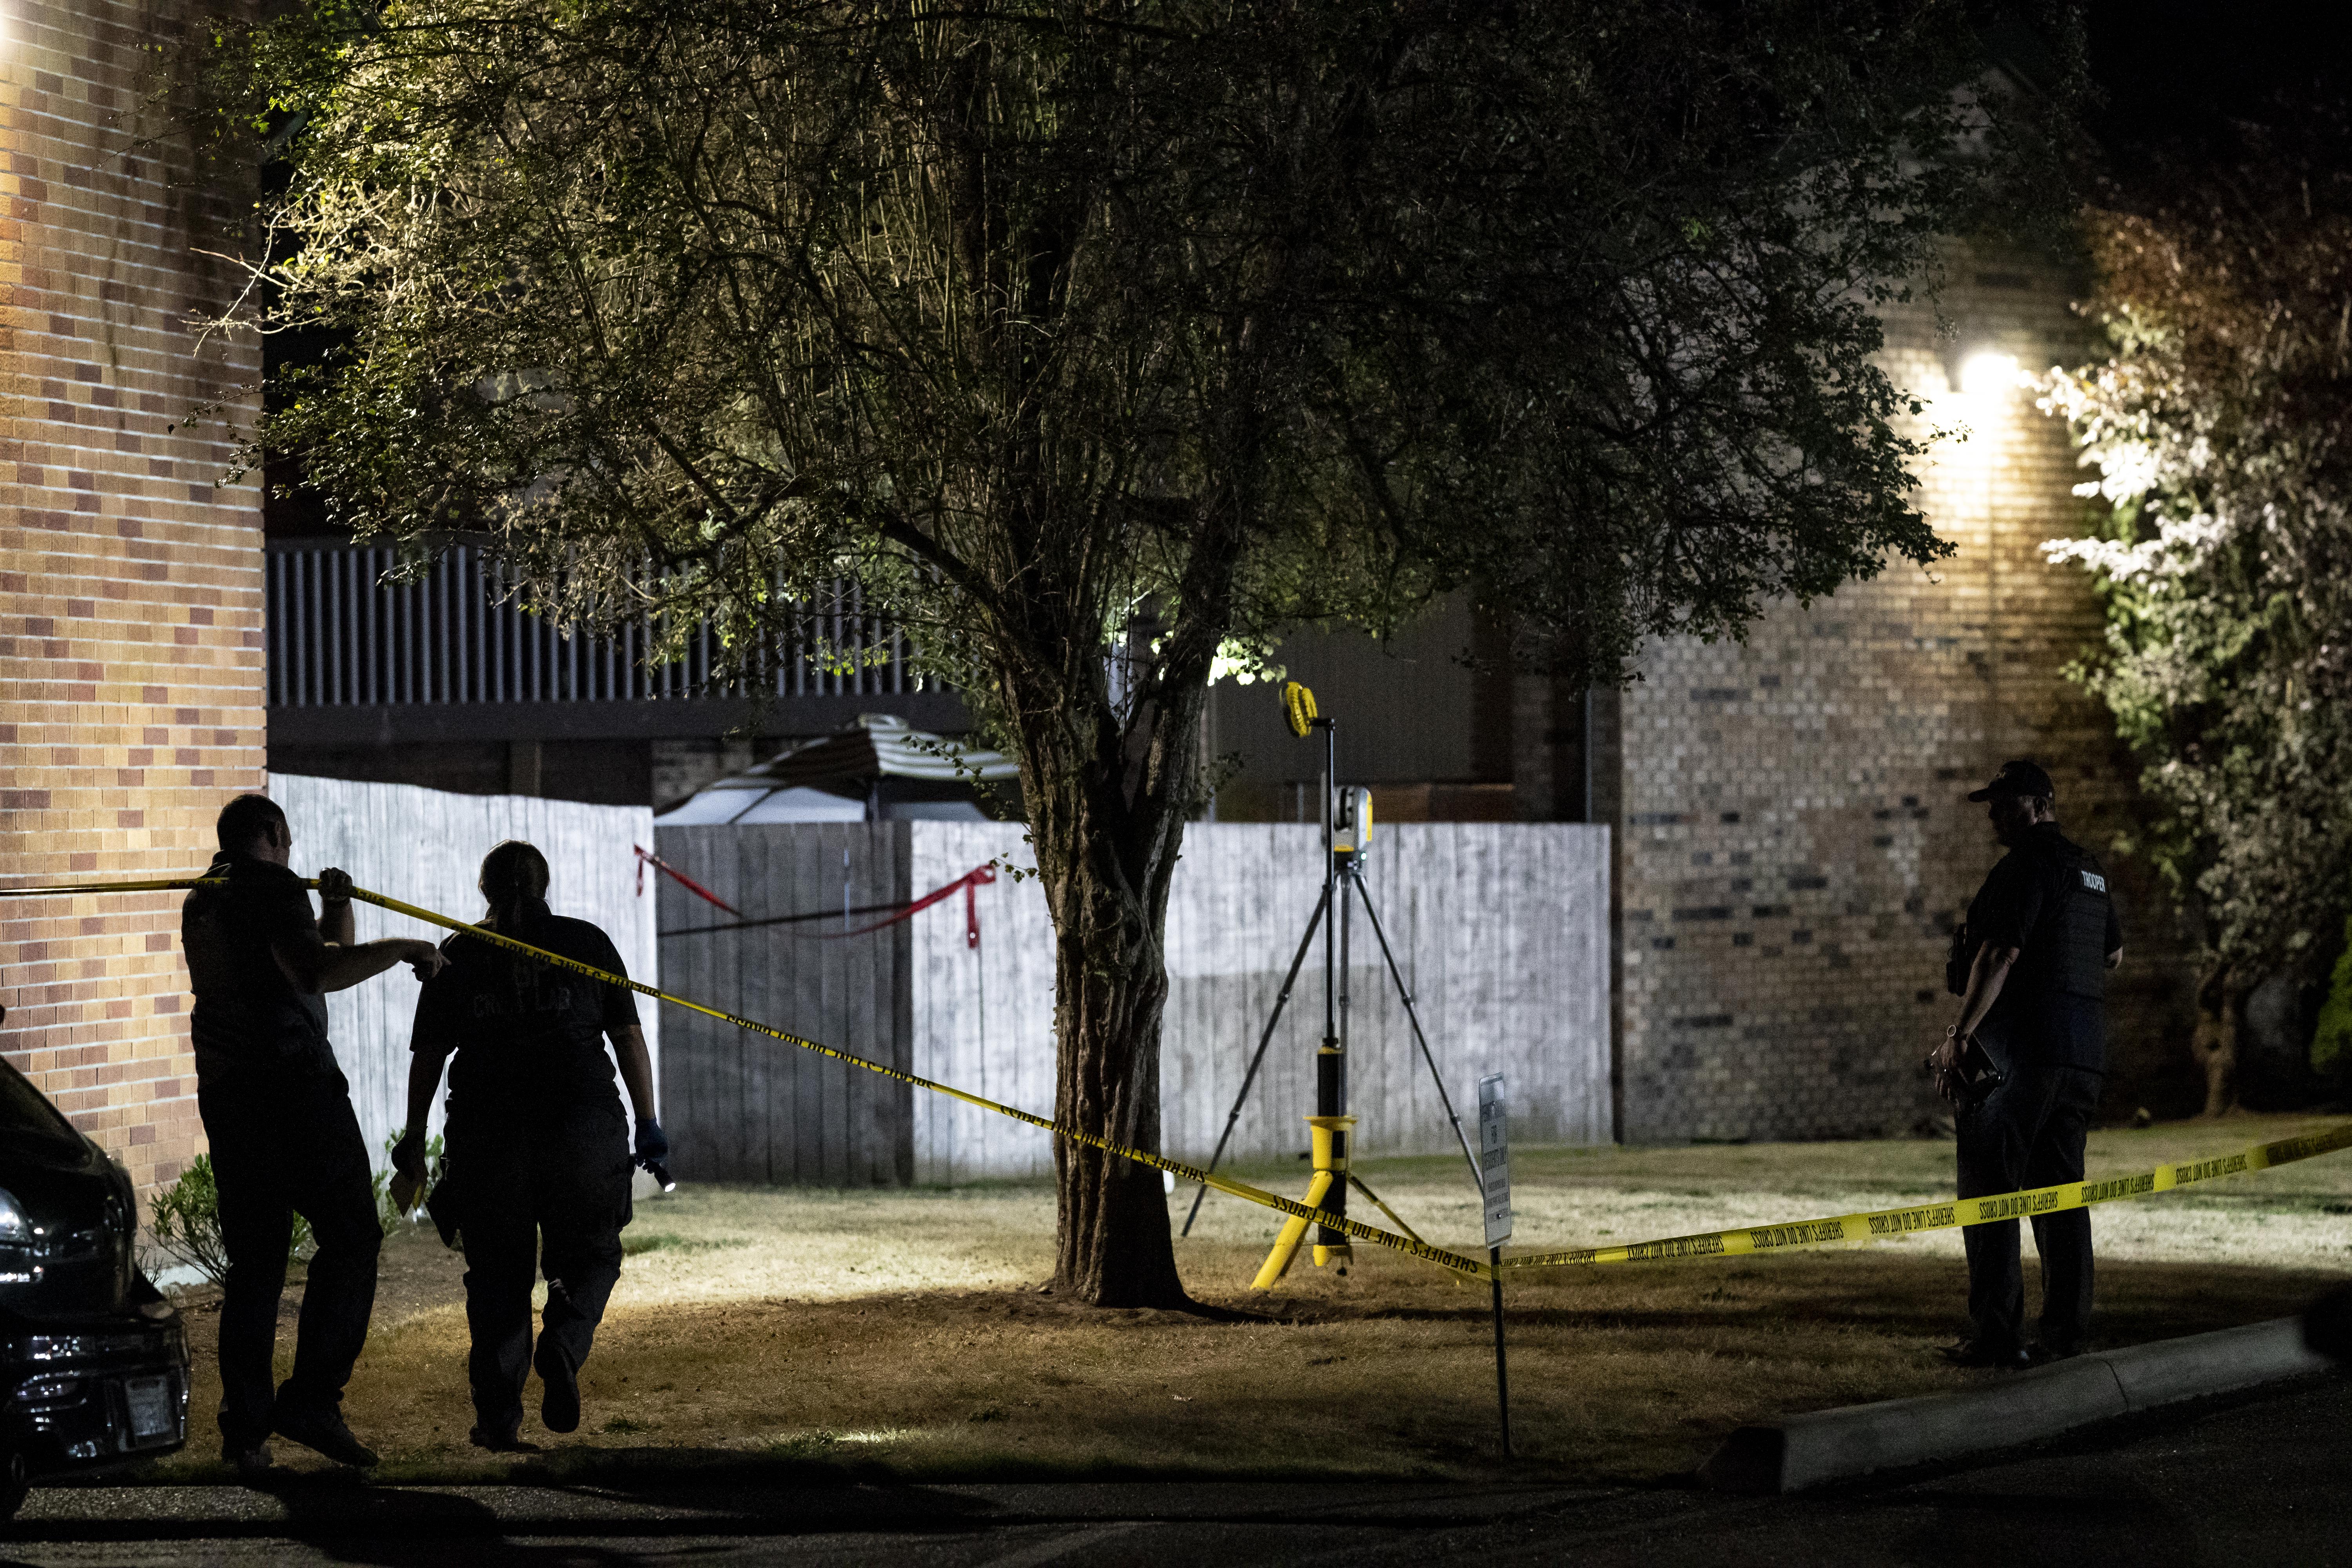 Three officers walk around a crime scene, marked by yellow tape. The scene appears to be outside an apartment building and around a tree.